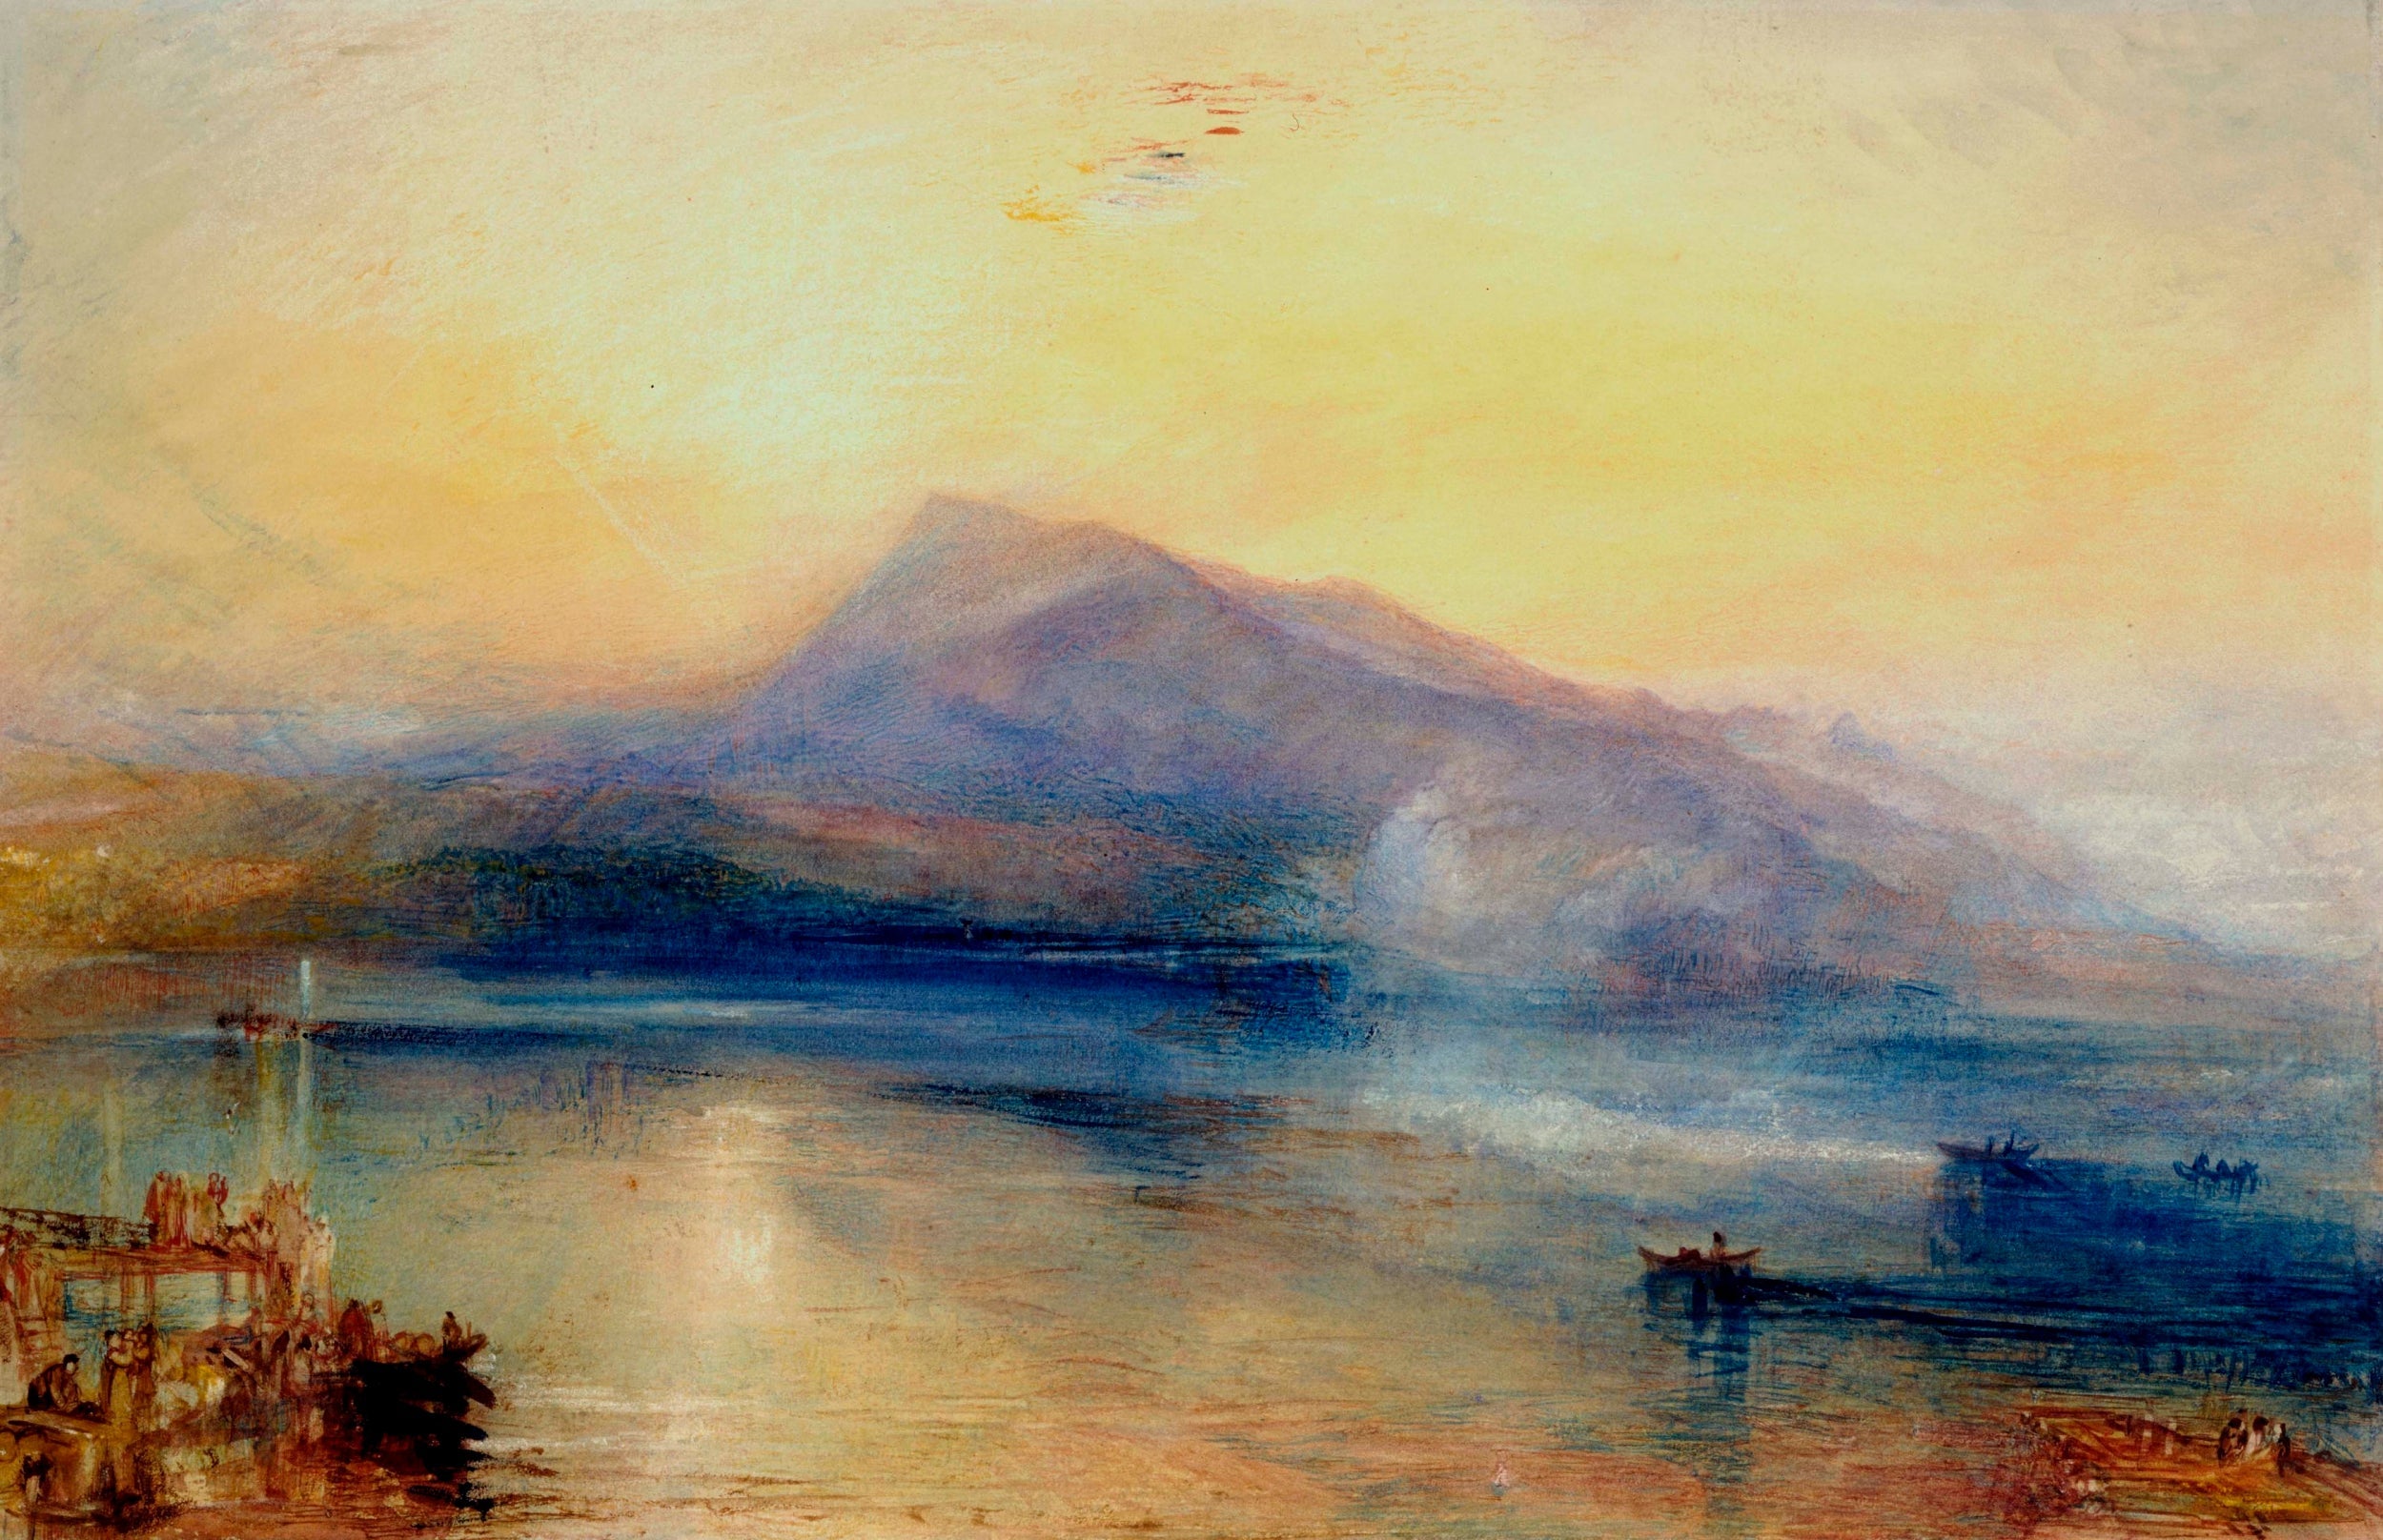 JMW Turner's The Dark Rigi, the Lake of Lucerne, which has had a temporary export bar placed on it so funds can be raised to save to have it on public display in the UK